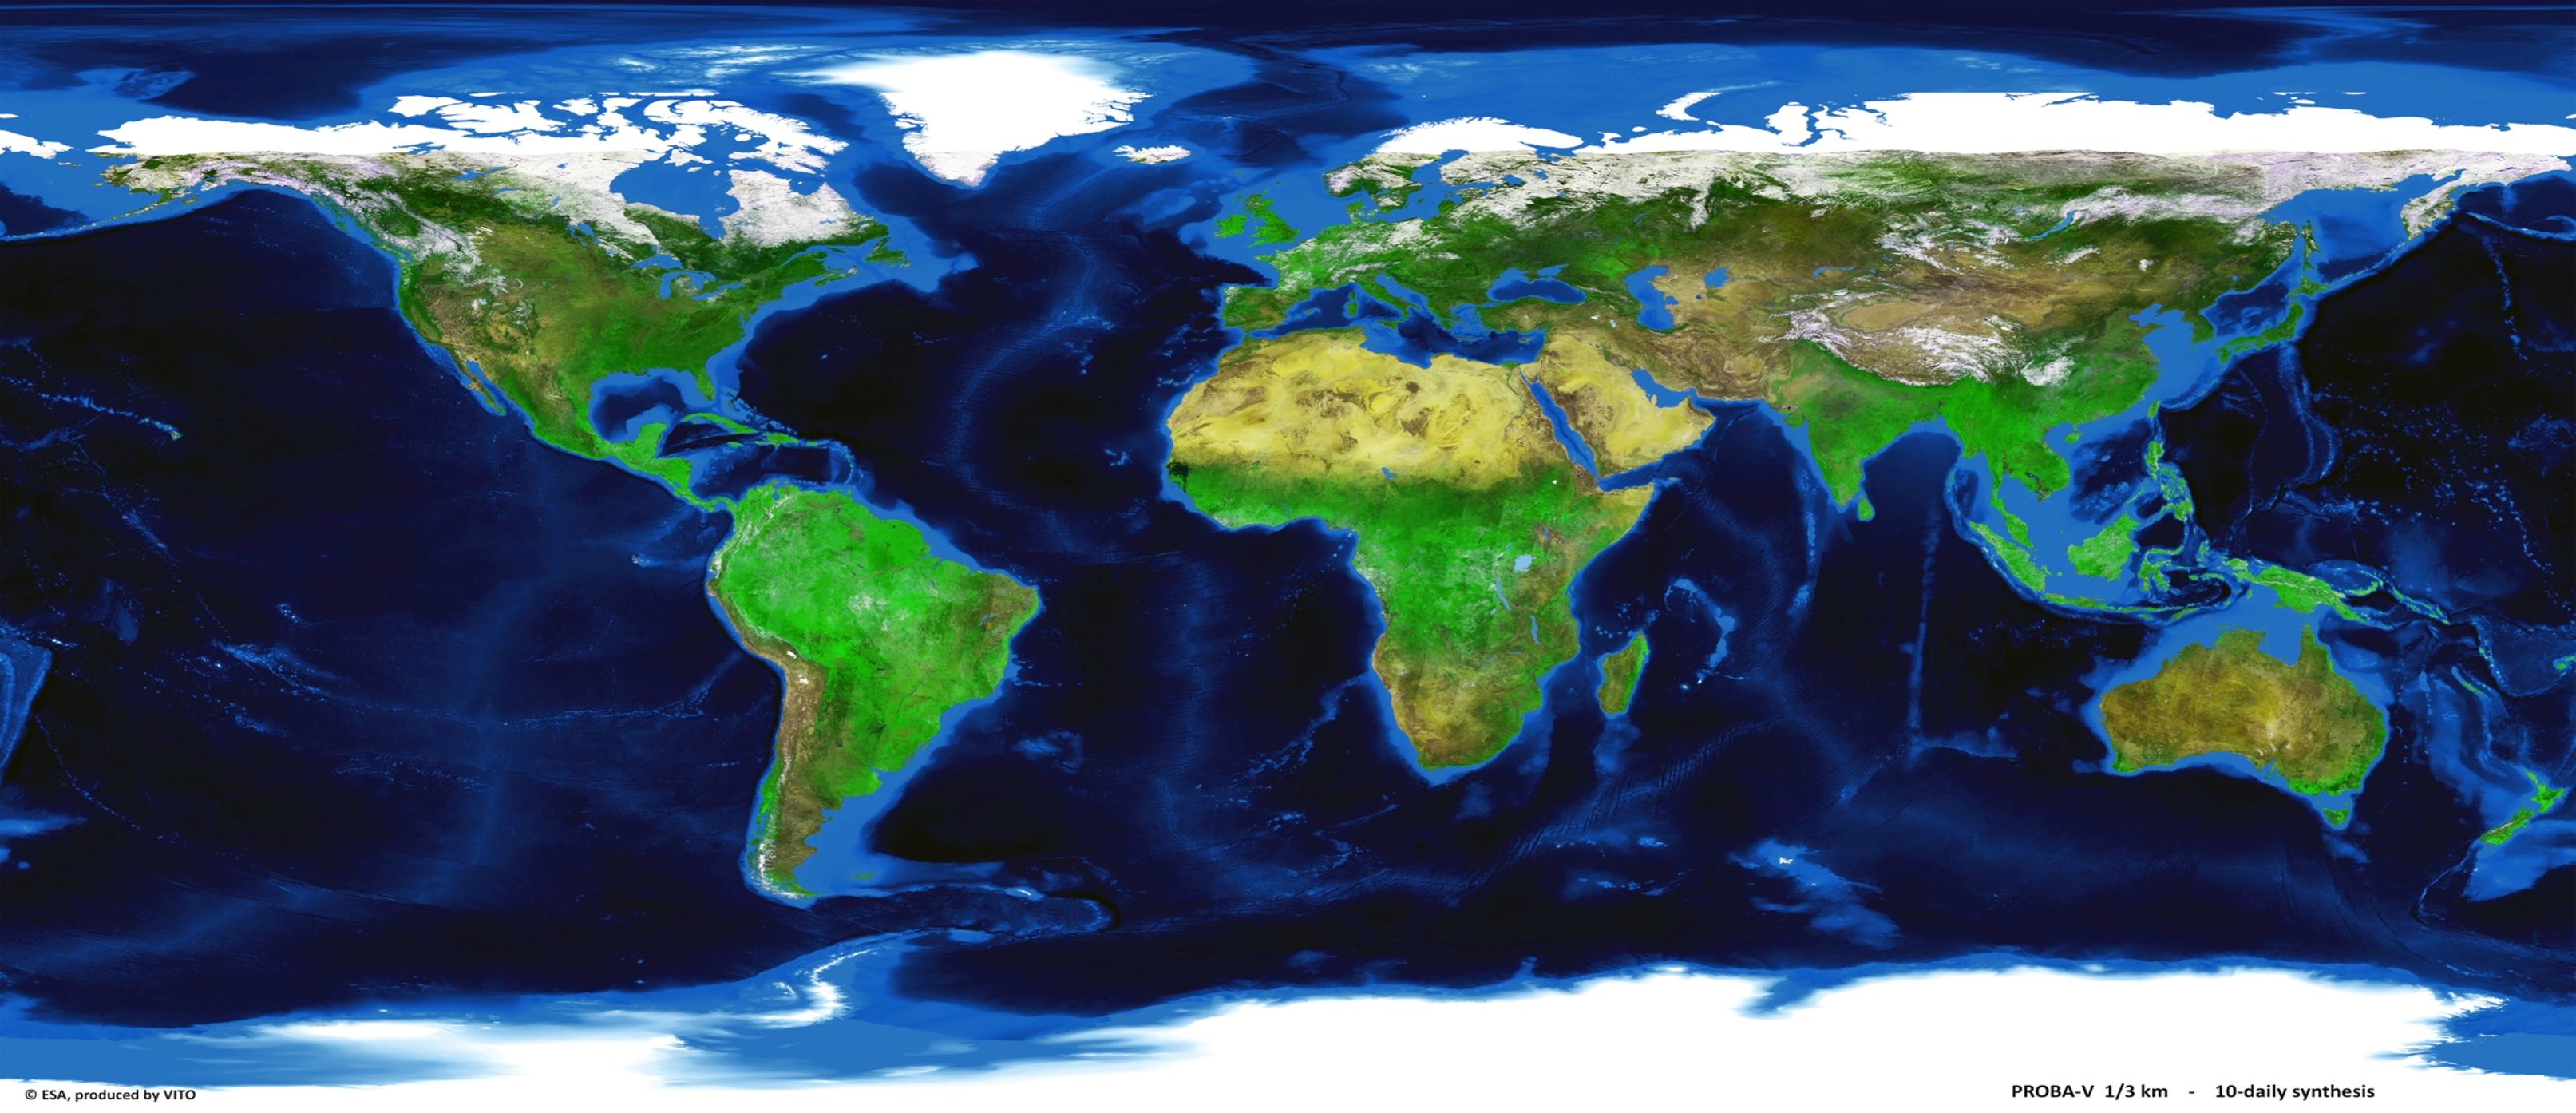 World map created with Proba-V data